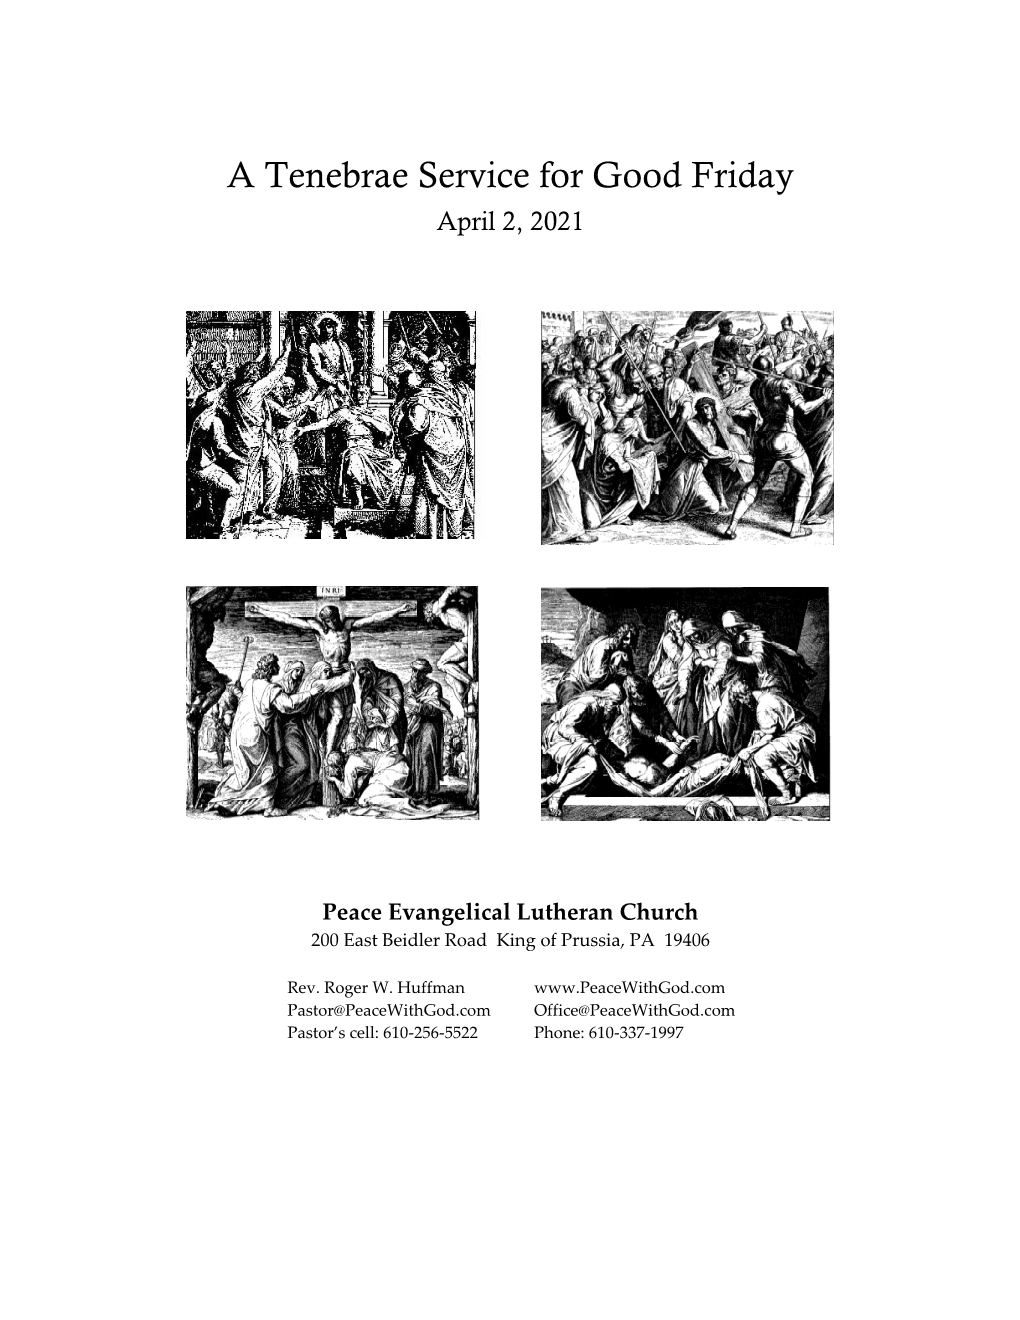 A Tenebrae Service for Good Friday April 2, 2021